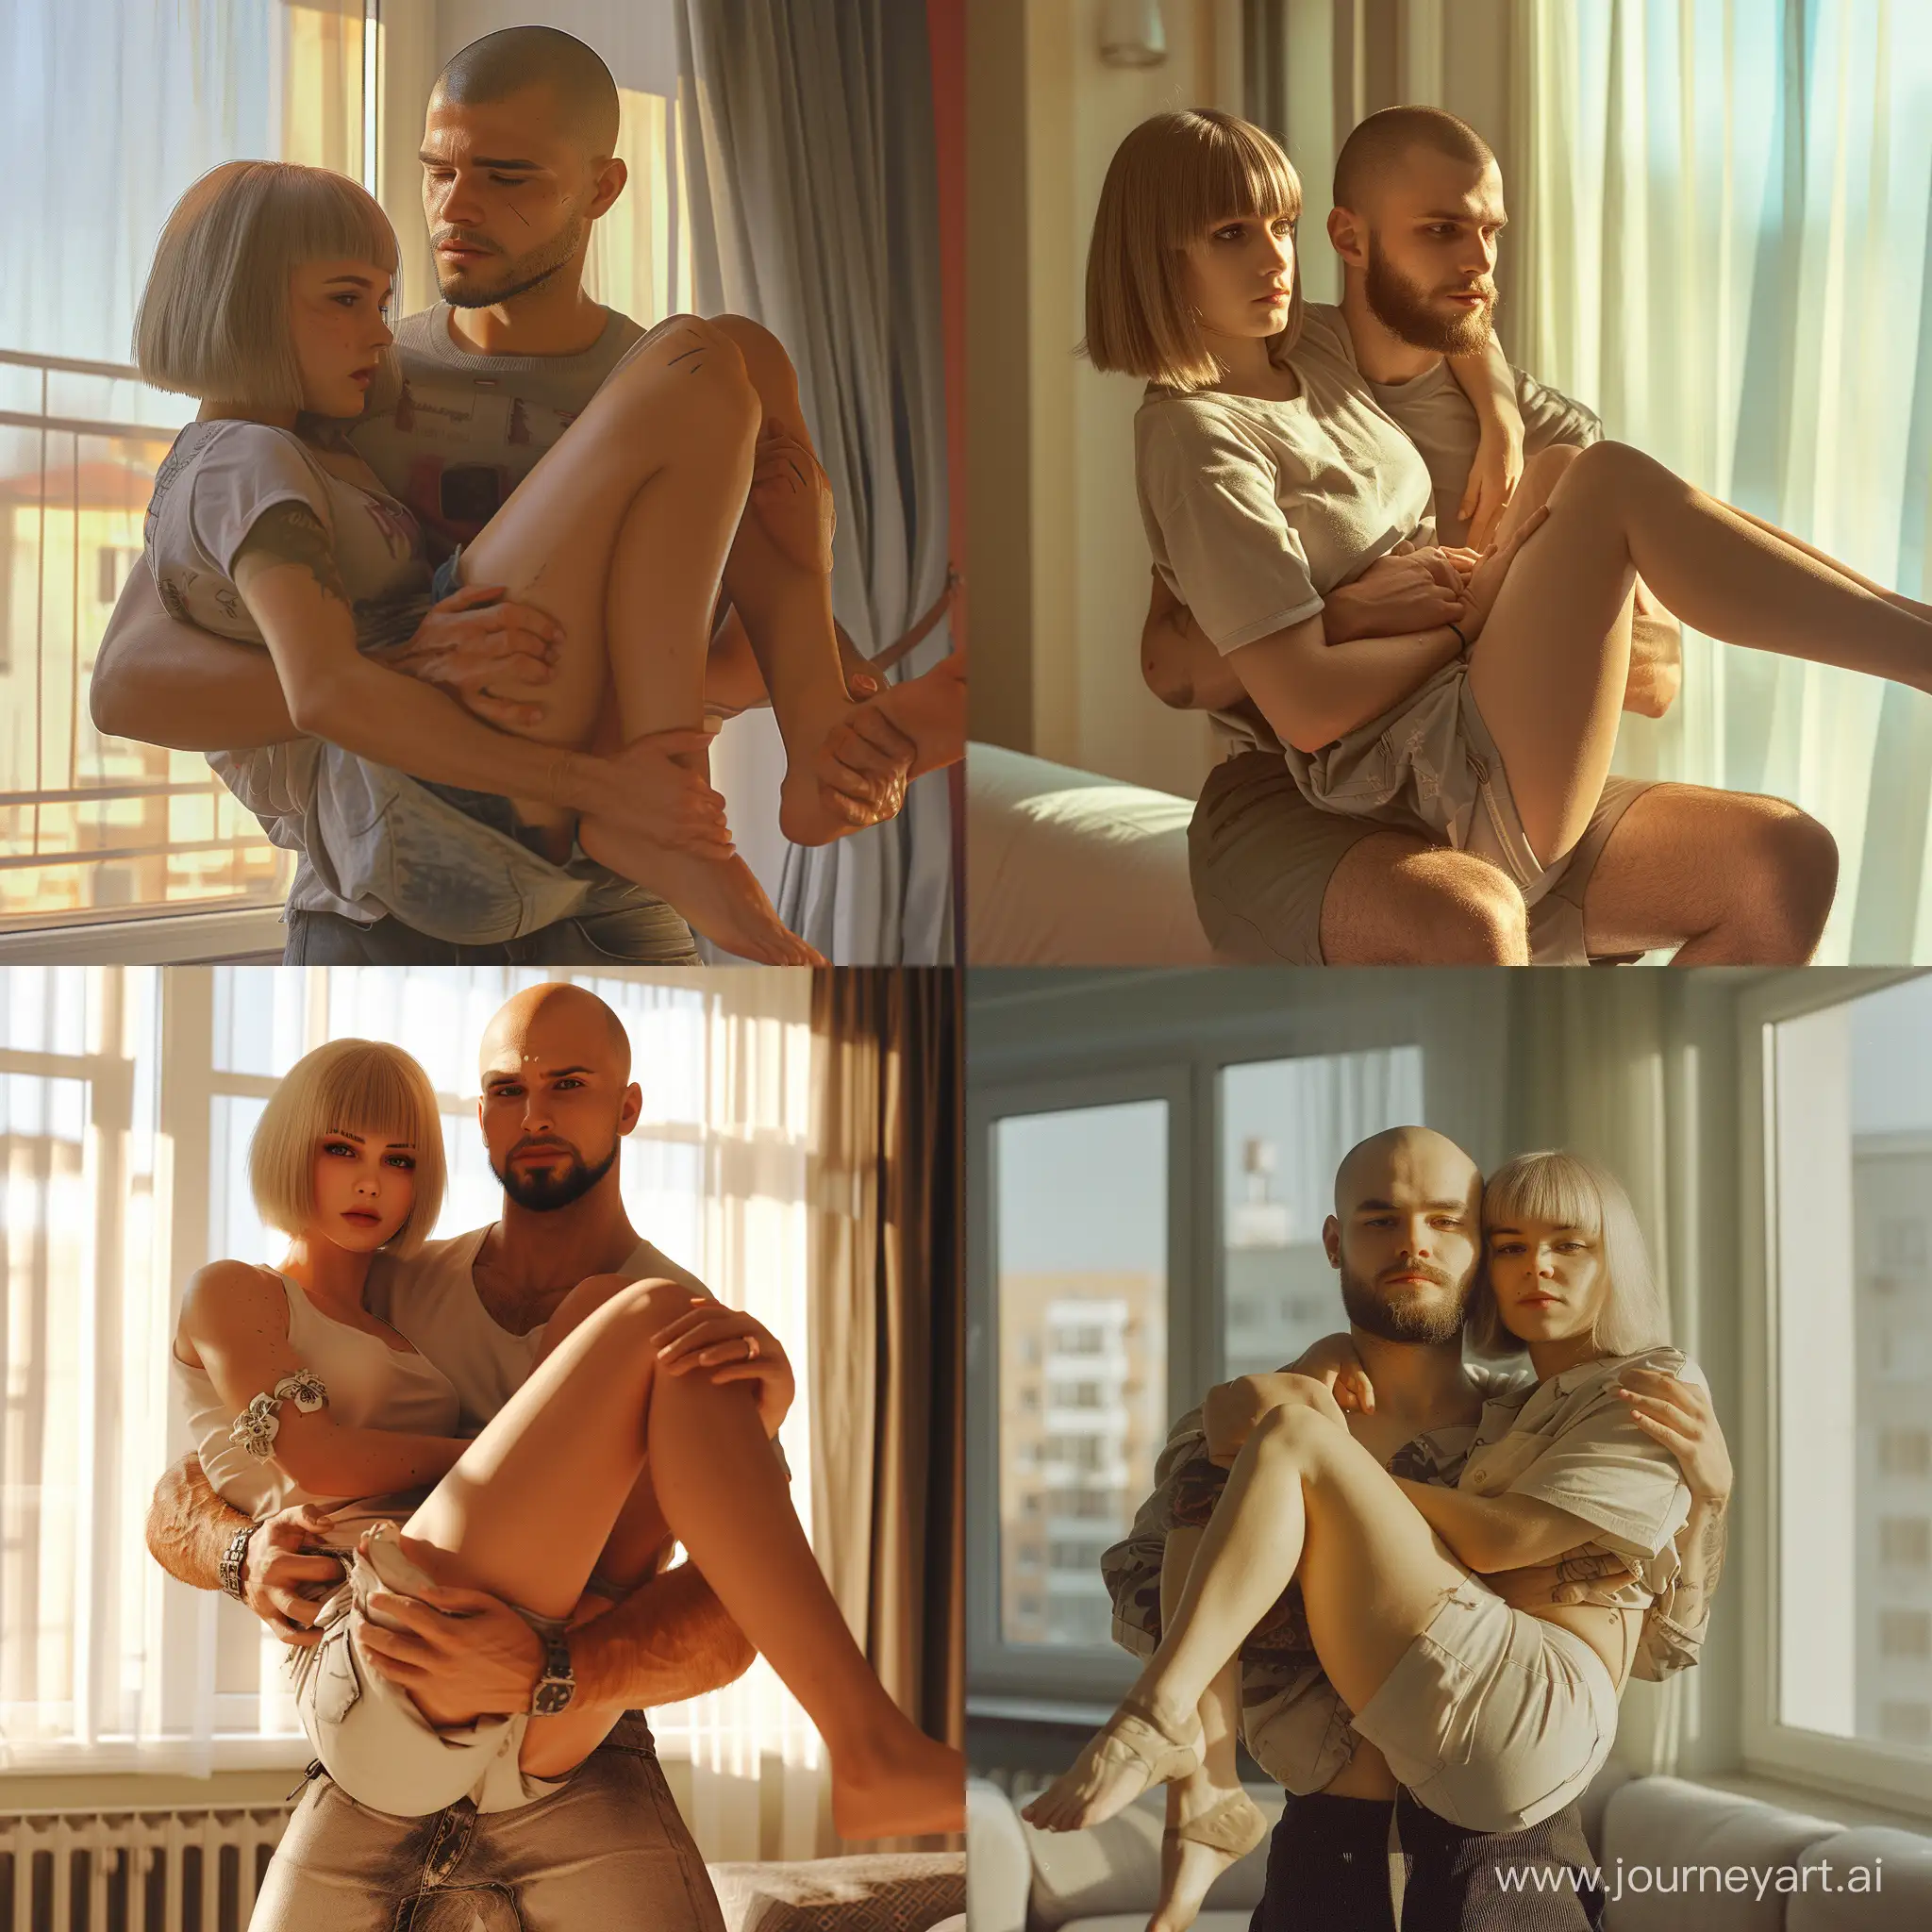 Passionate-Embrace-Bald-Young-Man-Holds-Girl-with-Bob-Haircut-in-Sunny-Apartment-Morning